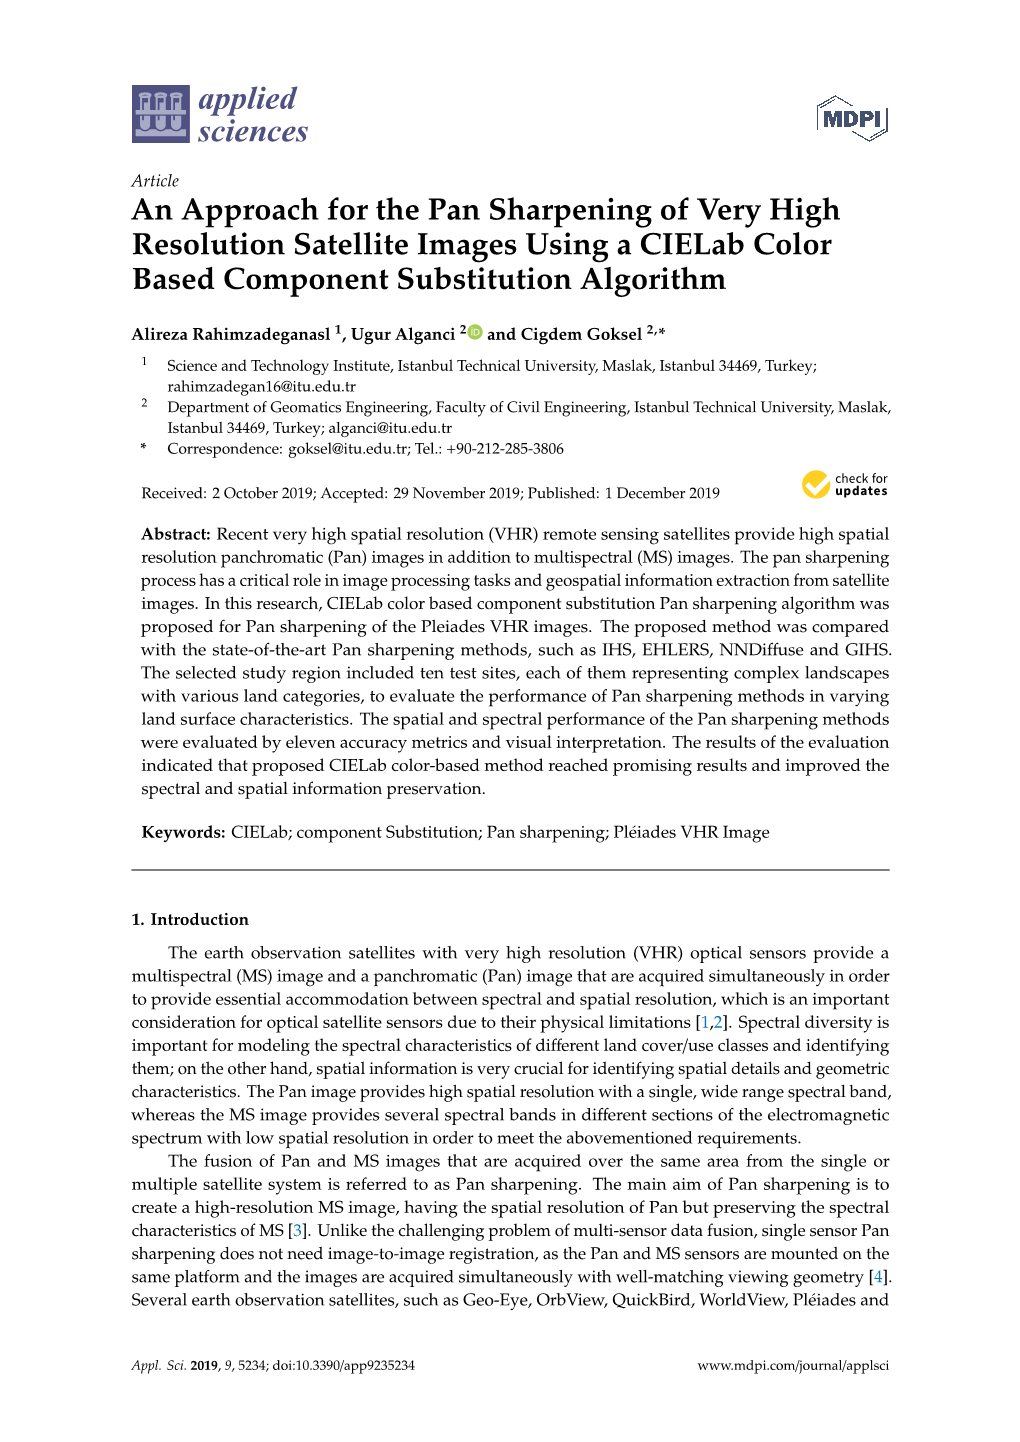 An Approach for the Pan Sharpening of Very High Resolution Satellite Images Using a Cielab Color Based Component Substitution Algorithm